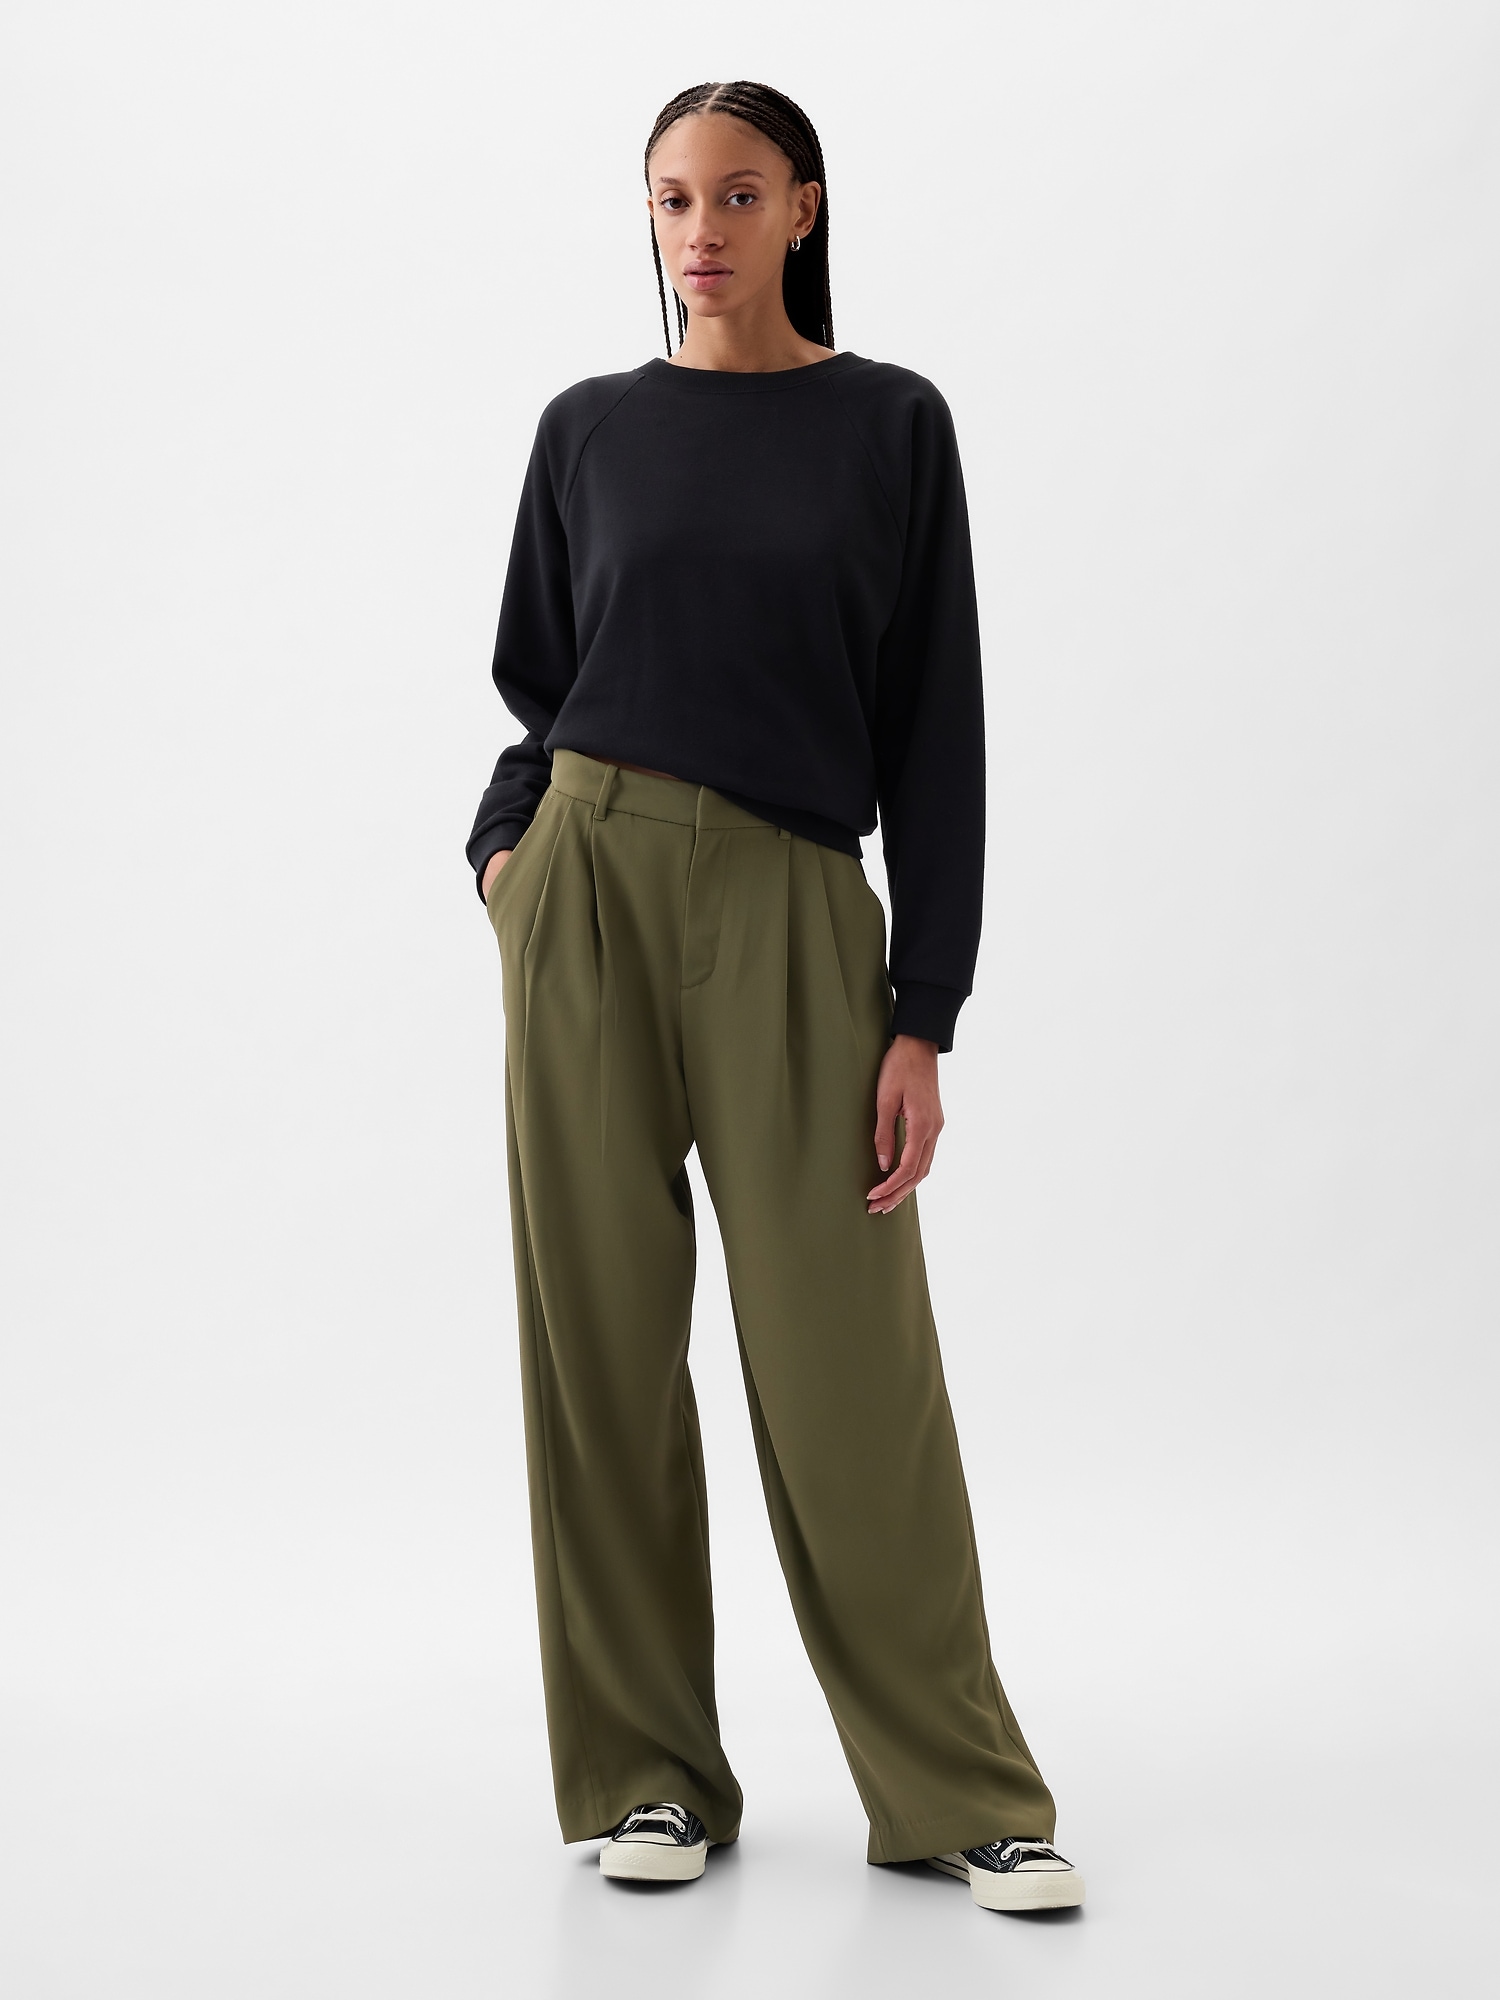 A New Day Women's High-Rise Pleat Front Tapered Chino Pants Olive